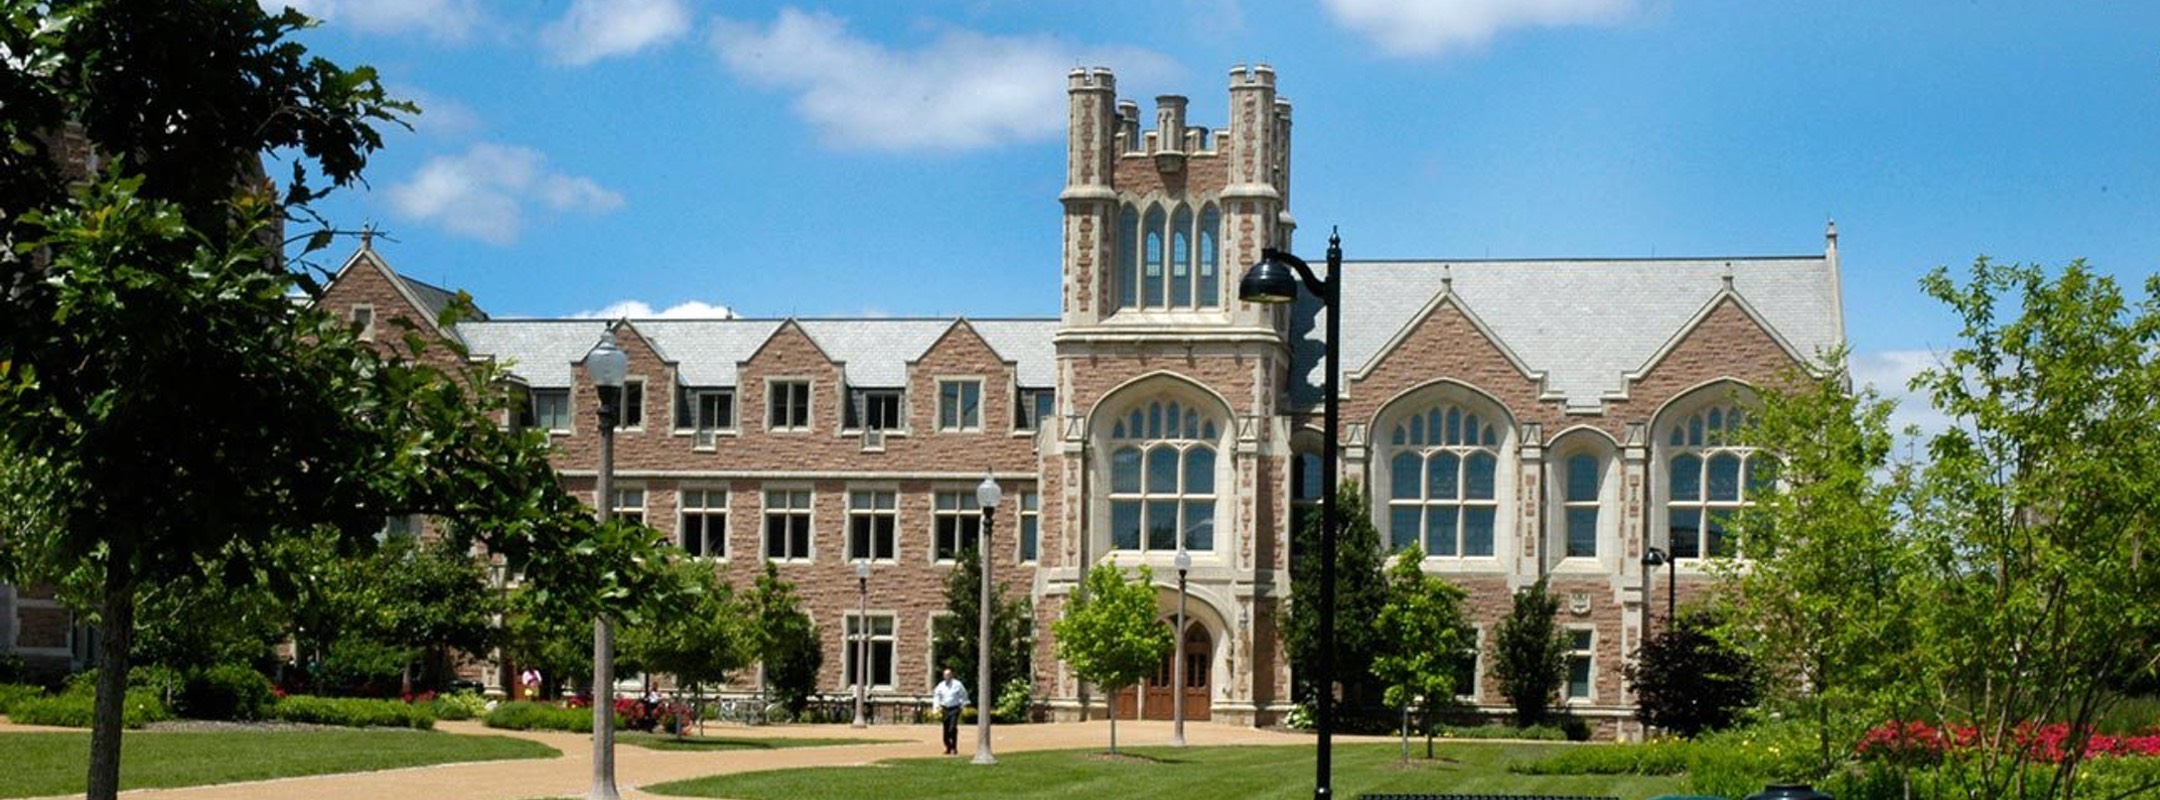 Studying Law at Washington University in St. Louis